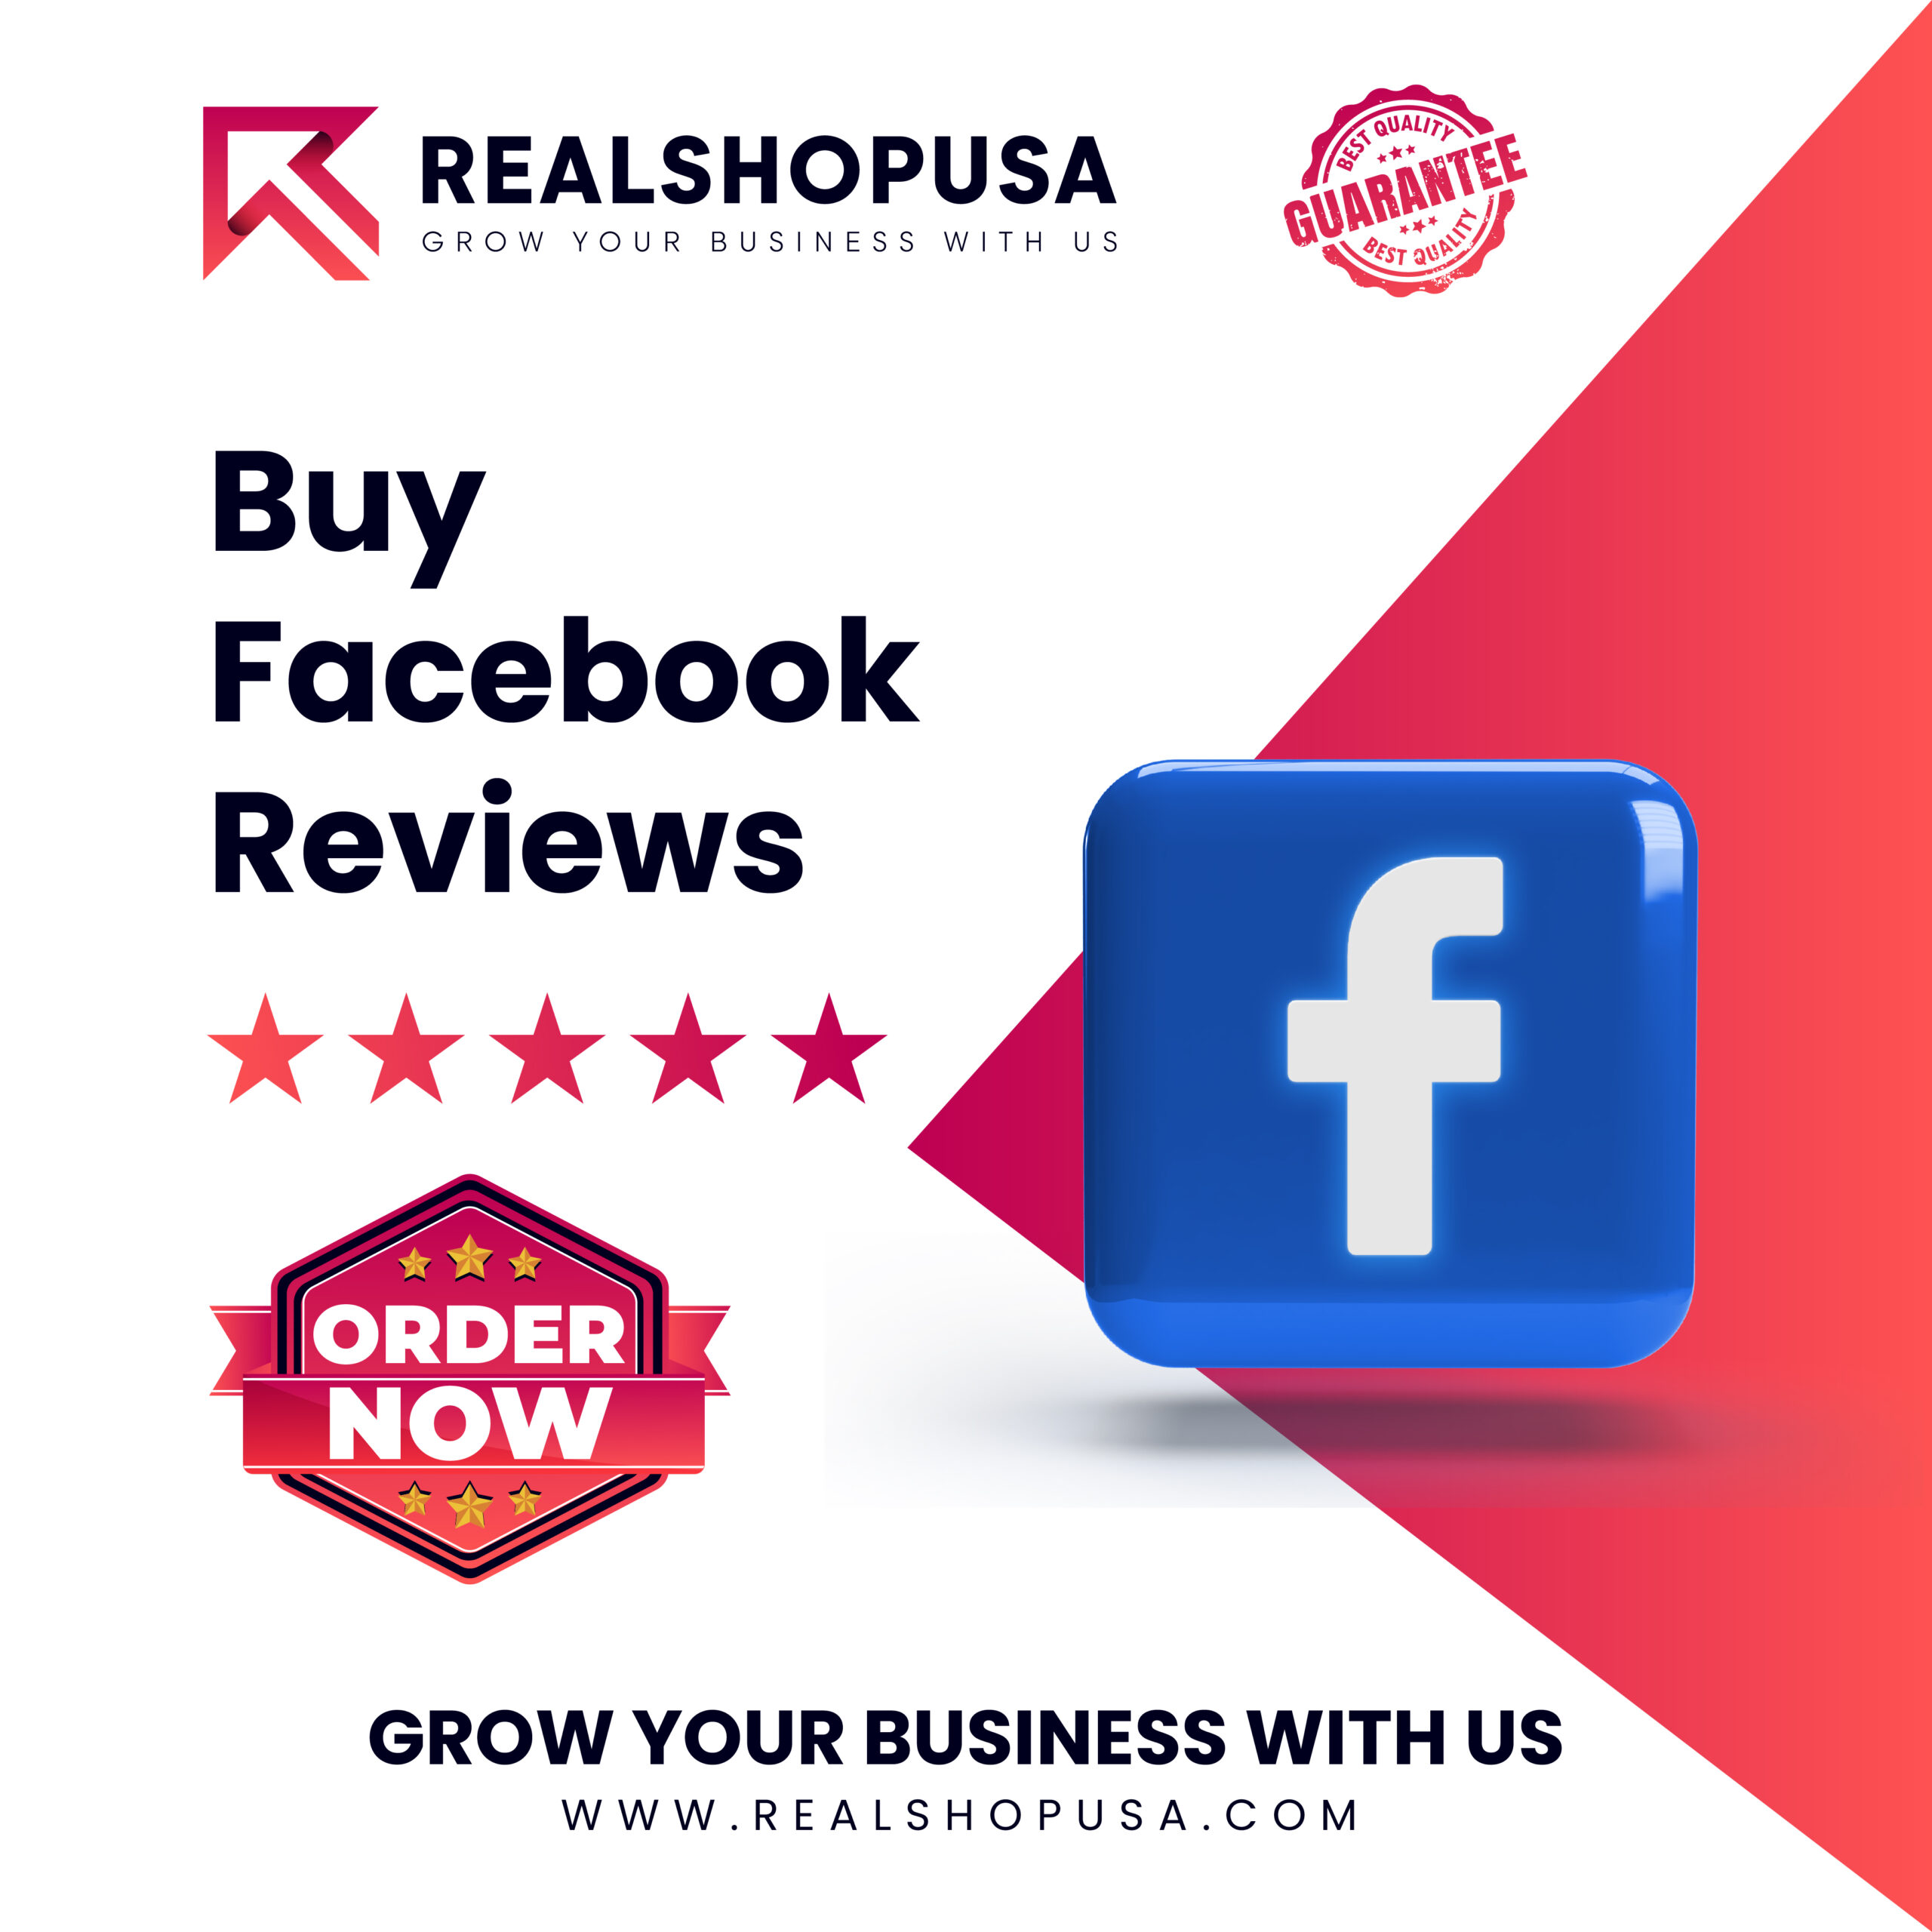 Buy Facebook Reviews - 5 Star Rating for your Business Page...